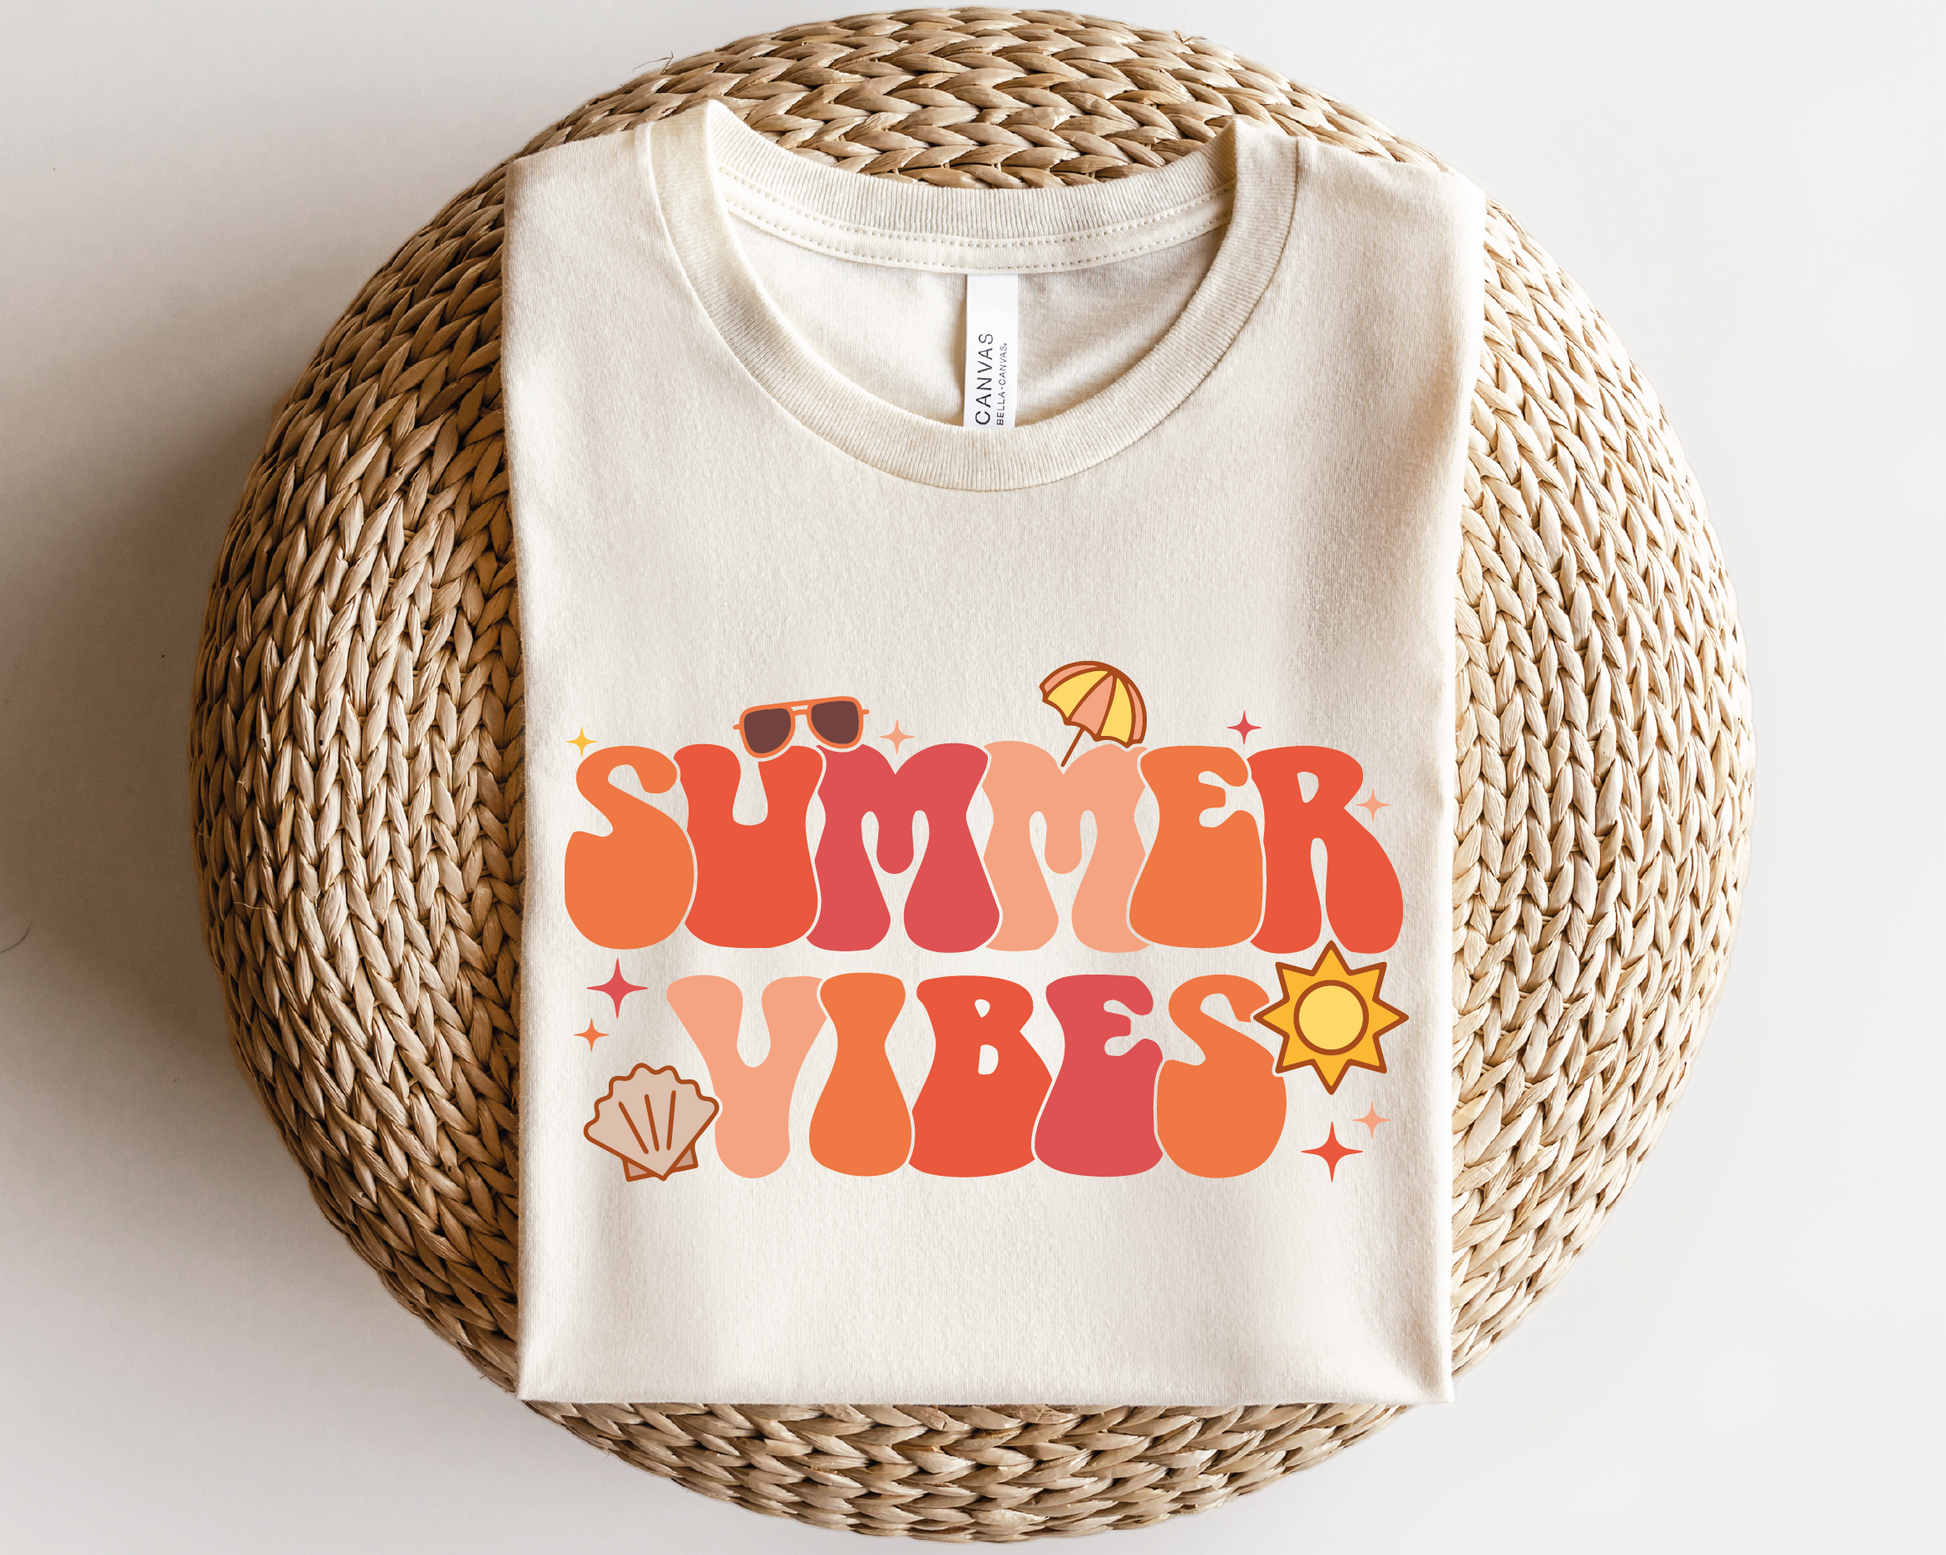 Premium Vector  Summer vibes text with sun sticker groovy aesthetic poster  design bright retro style vector illustration